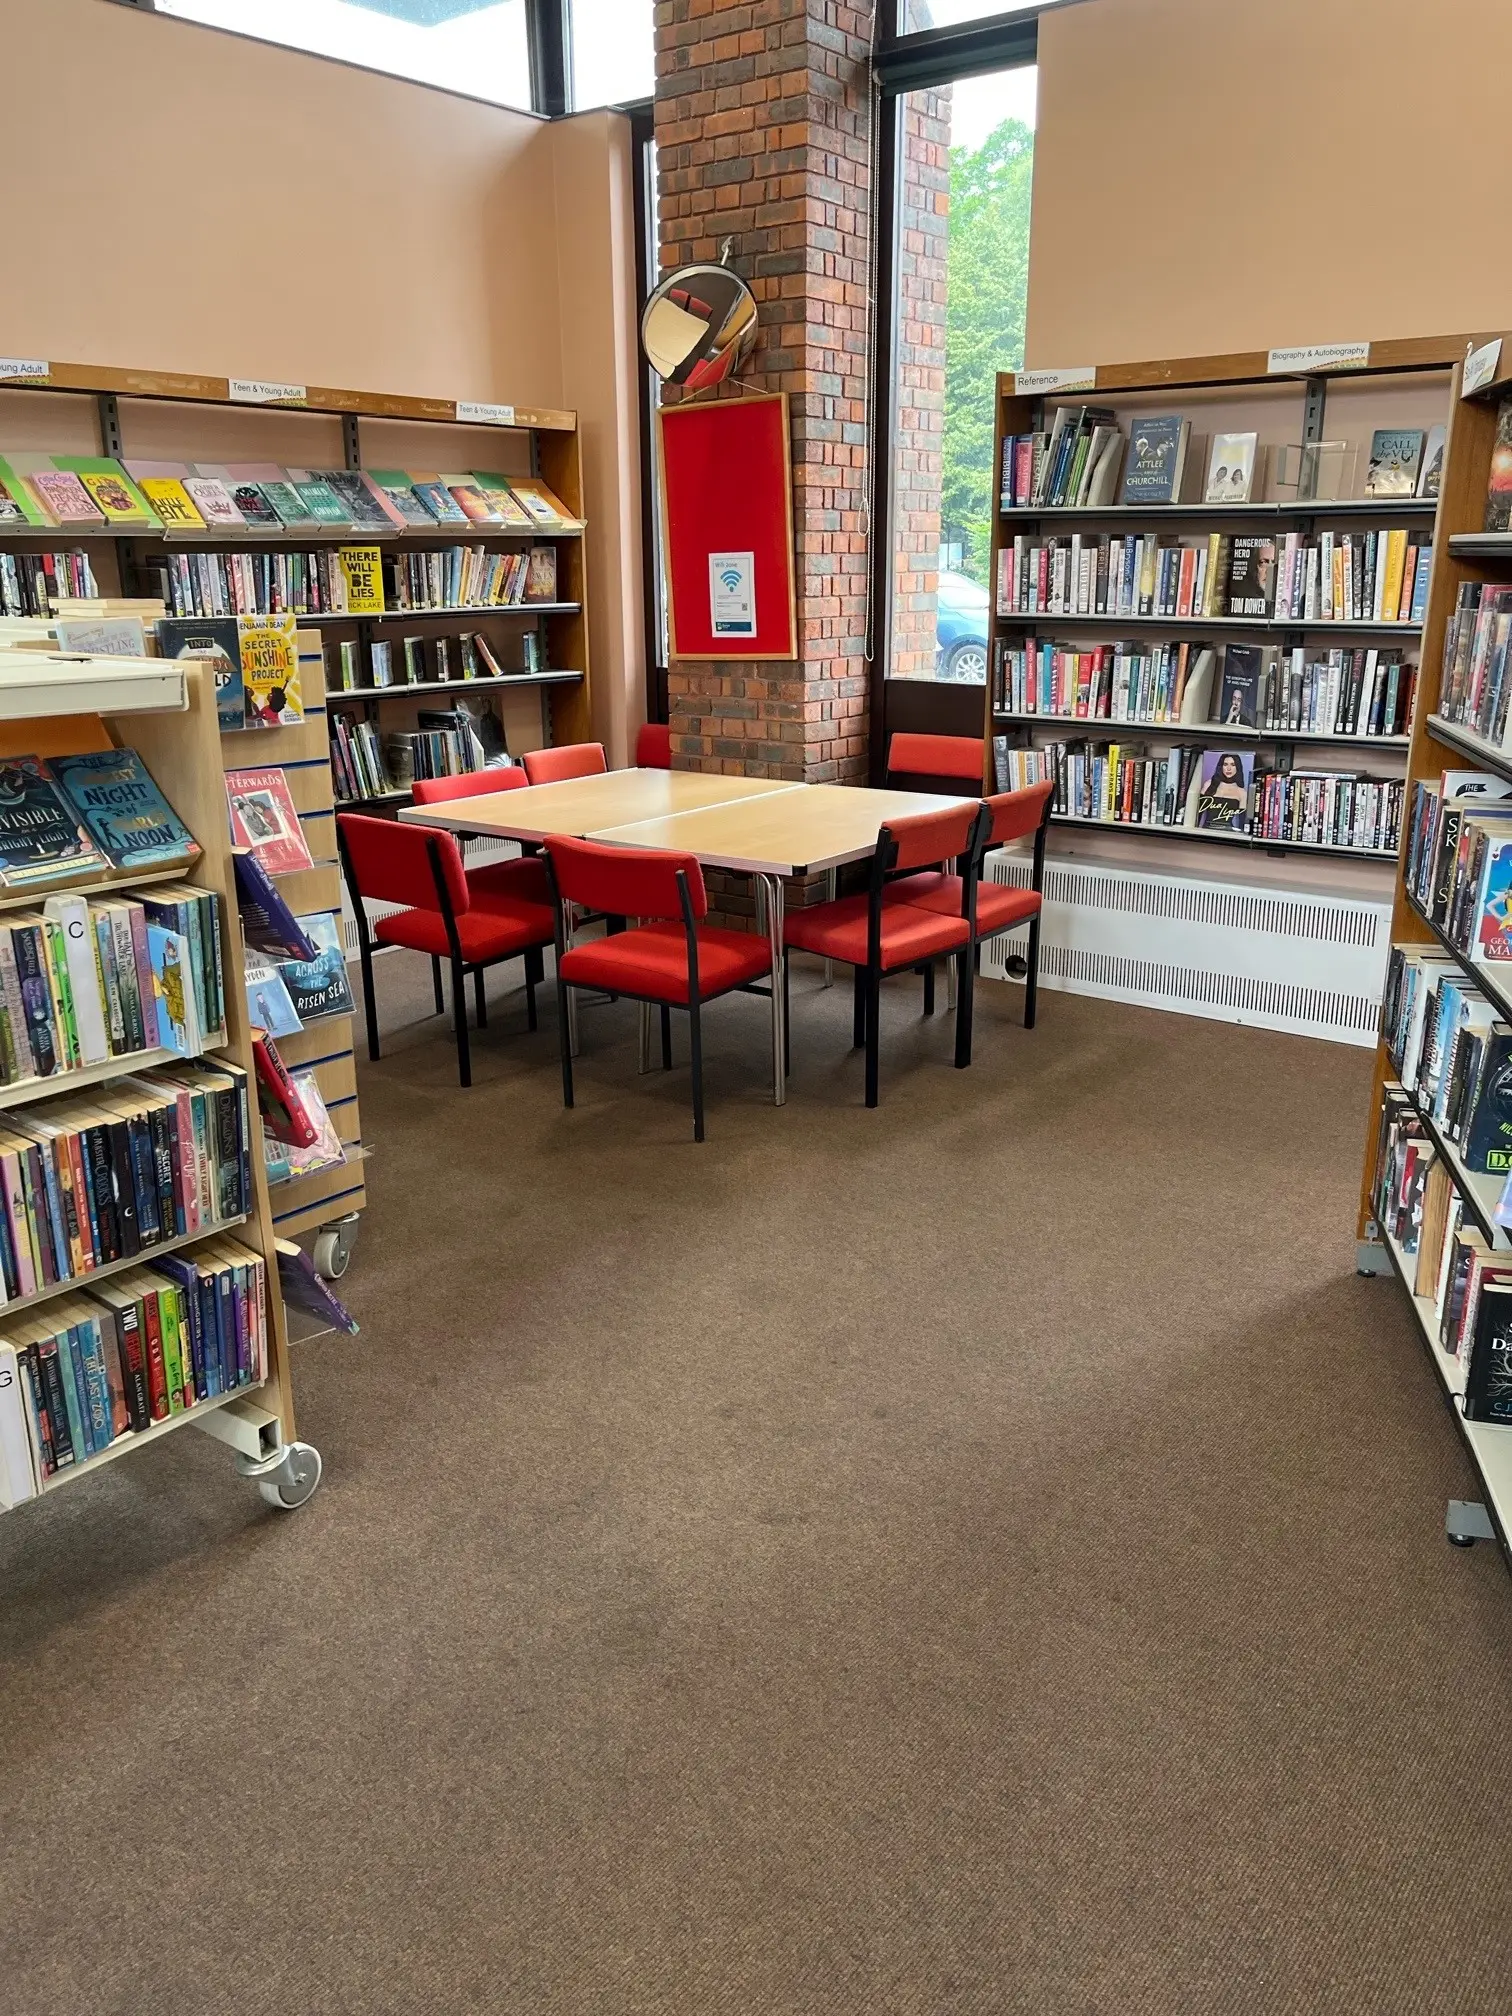 This is a picture of a square table surrounded by seven red chair.  There are book shelves to  the sides and back of the room.